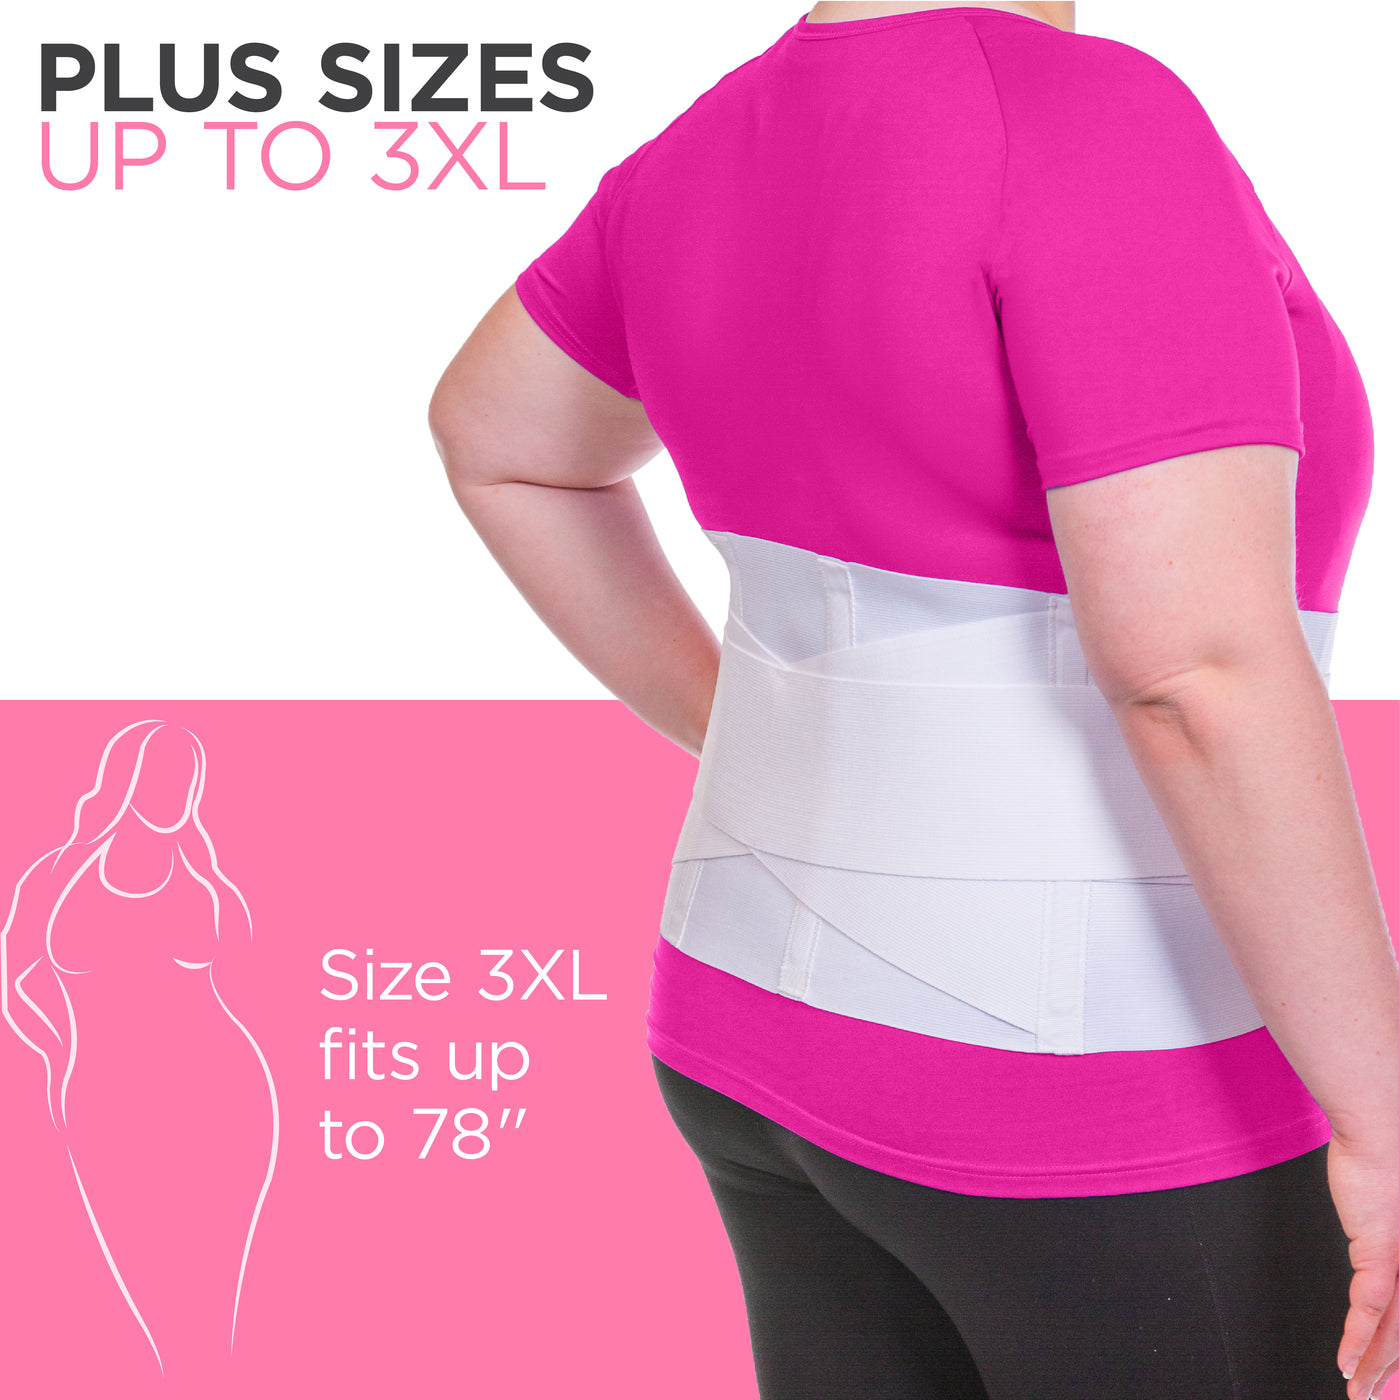 Plus size back brace fits body circumferences up to 78 inches